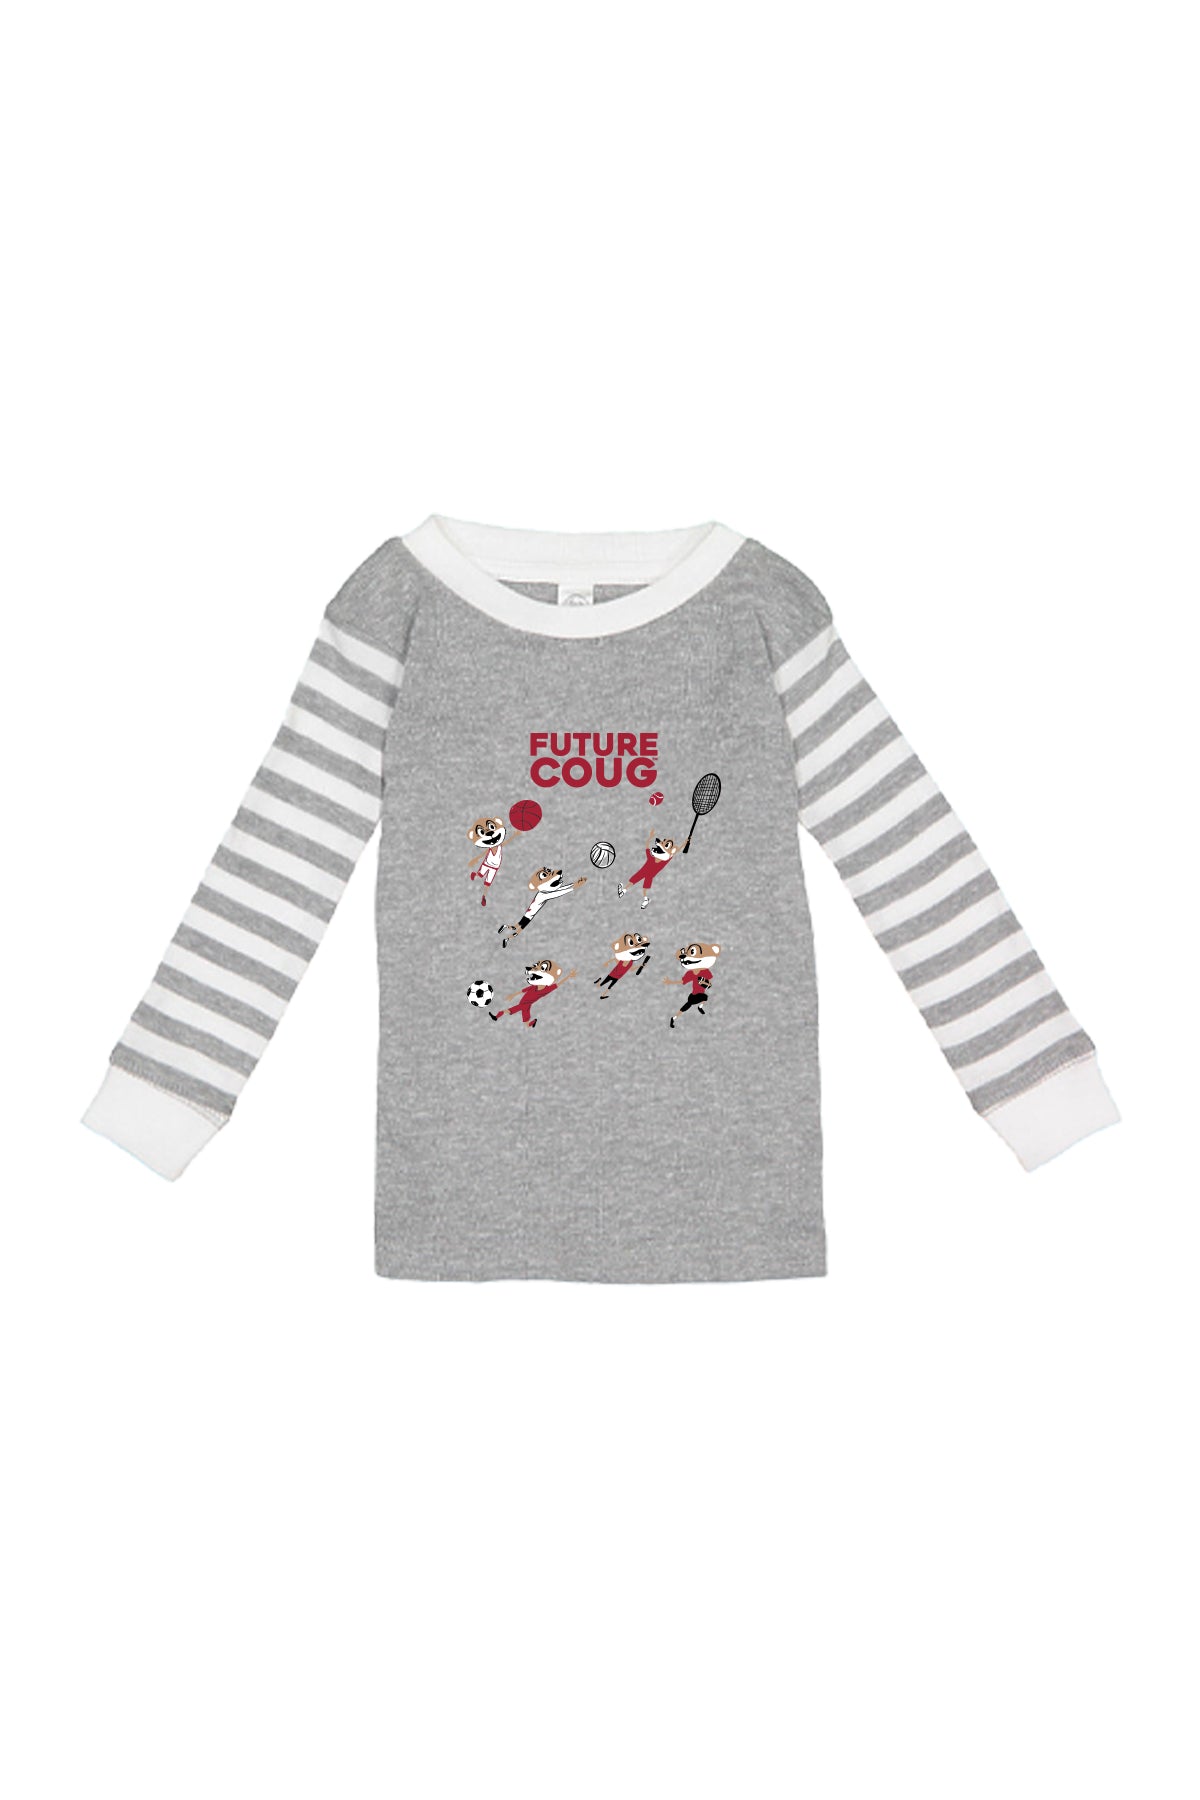 Load image into Gallery viewer, Future Coug Toddler PJ Set
